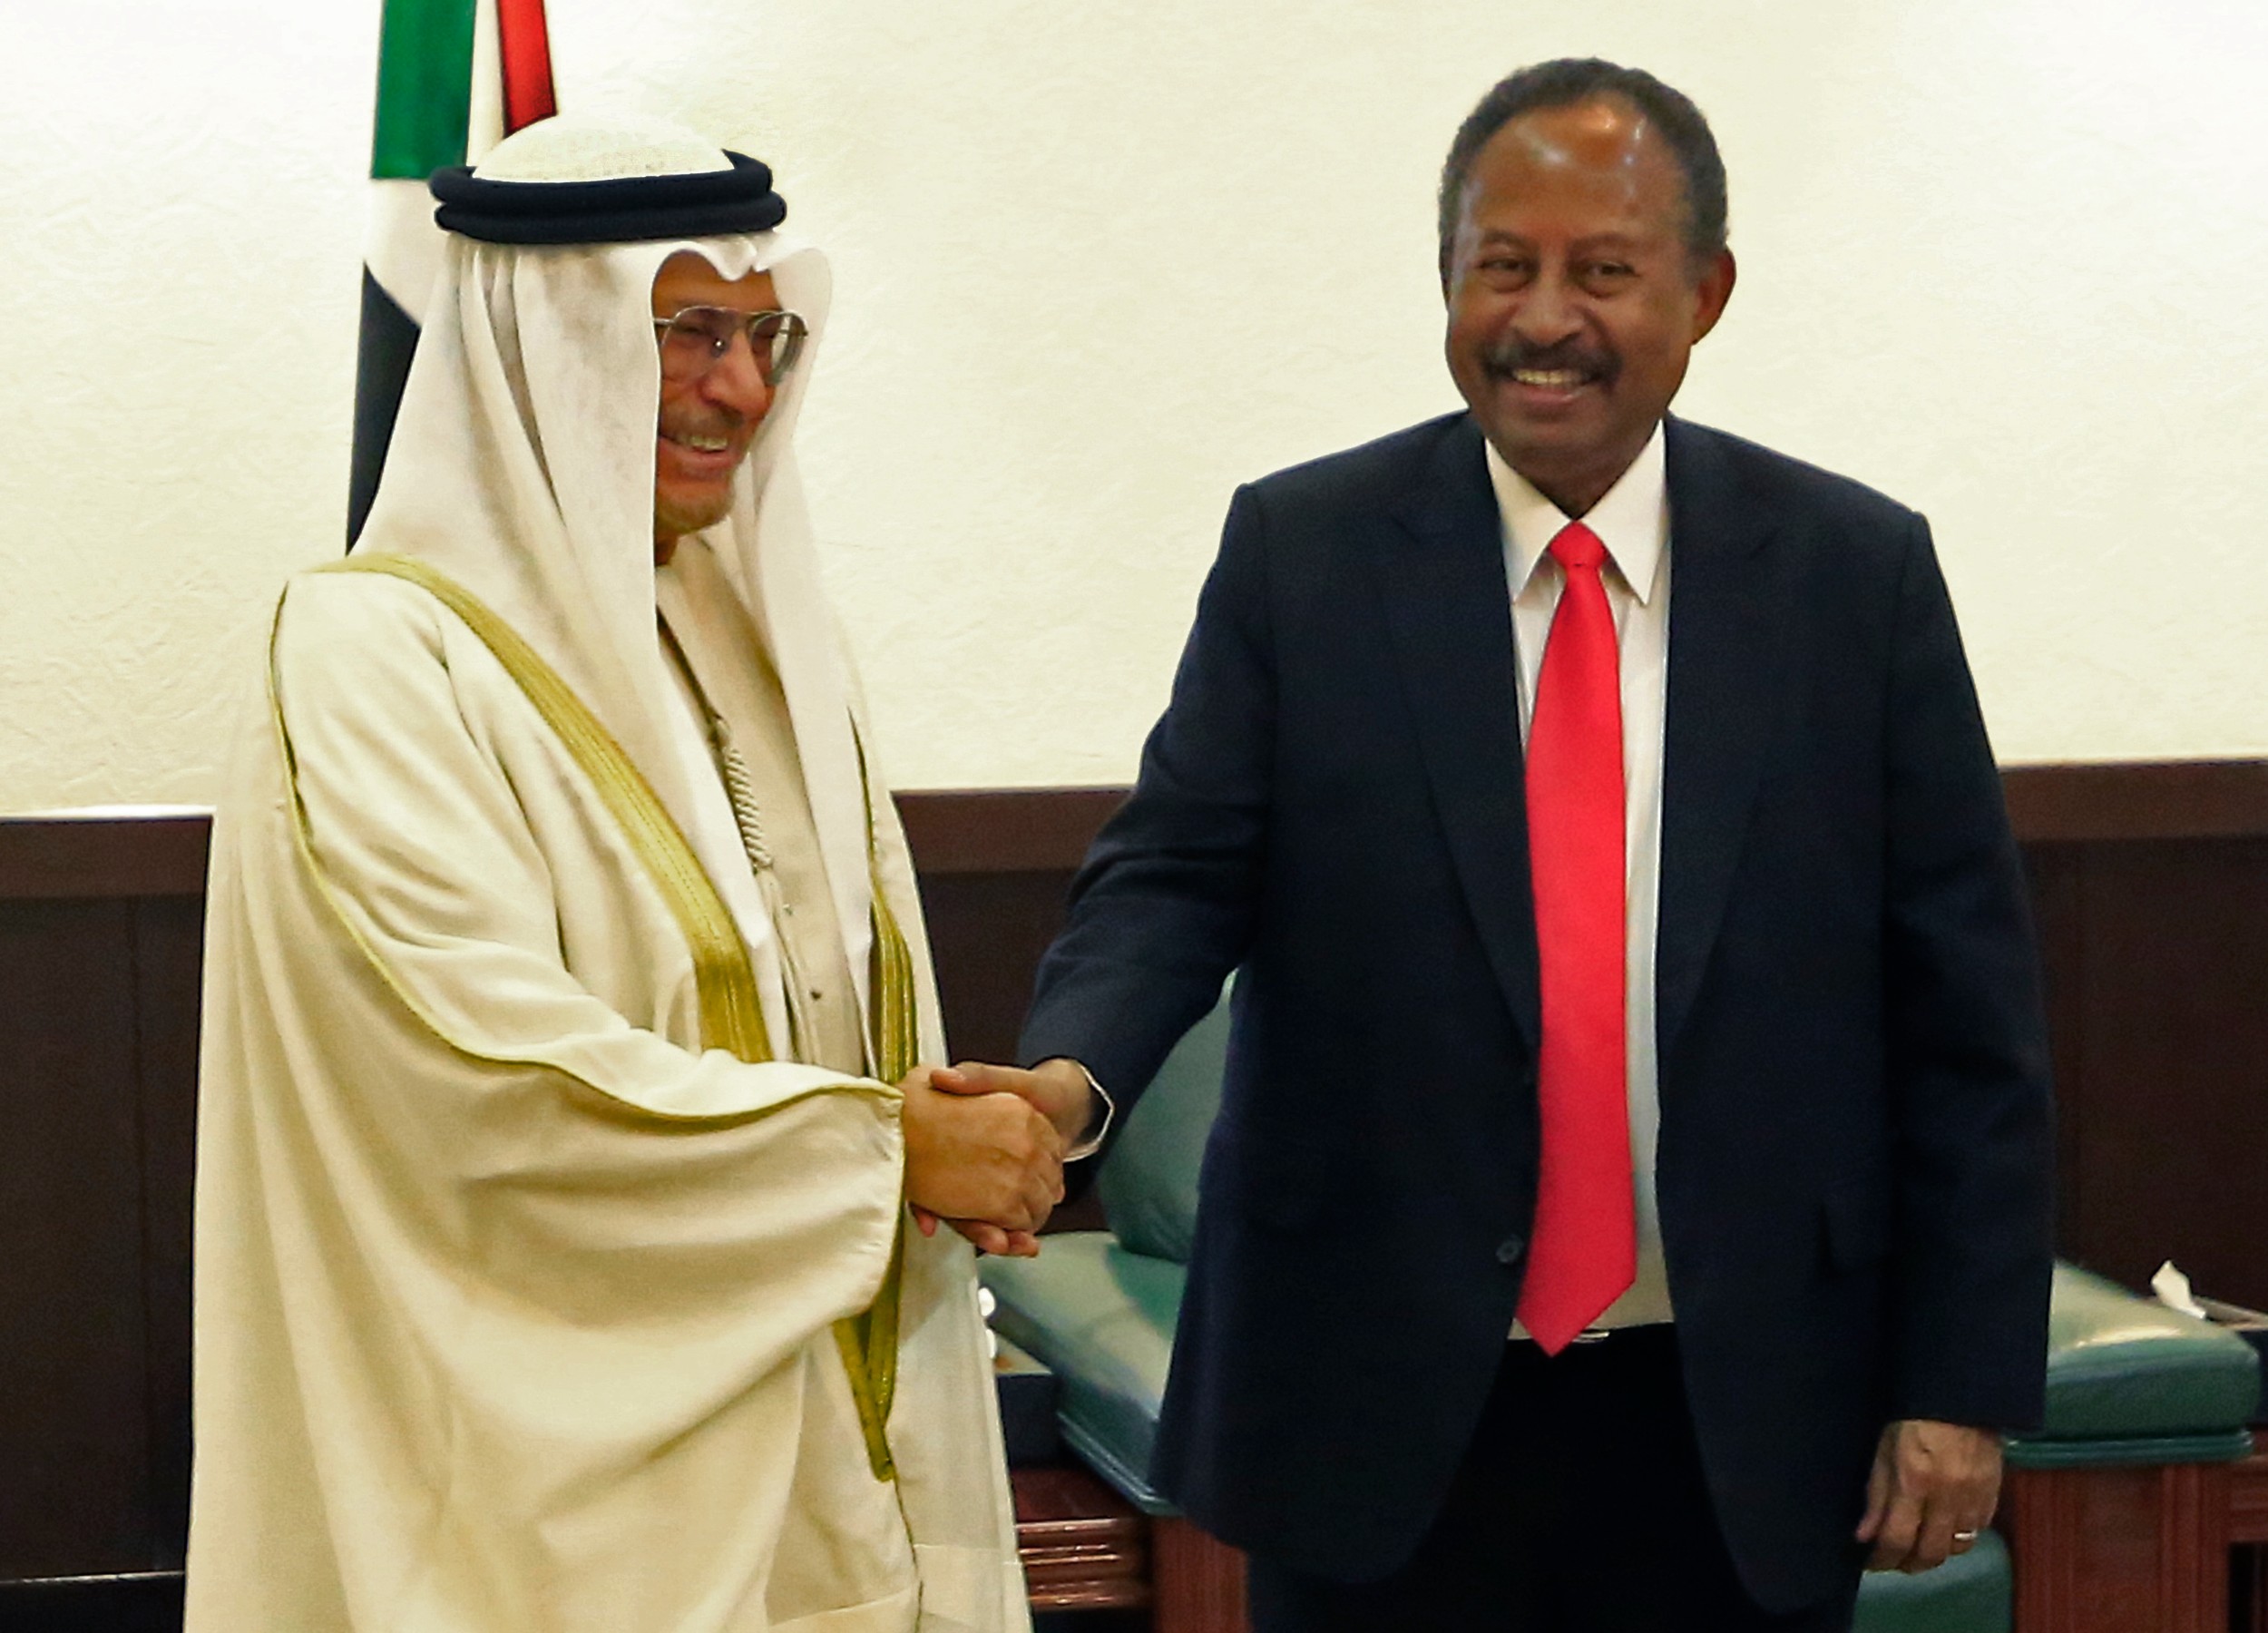 Sudan Prime Minister Abdalla Hamdok shakes hands with UAE Foreign Affairs Minister Anwar Gargash in Khartoum on 14 January. The UAE reportedly facilitated the Burhan-Netanyahu meeting (AFP)